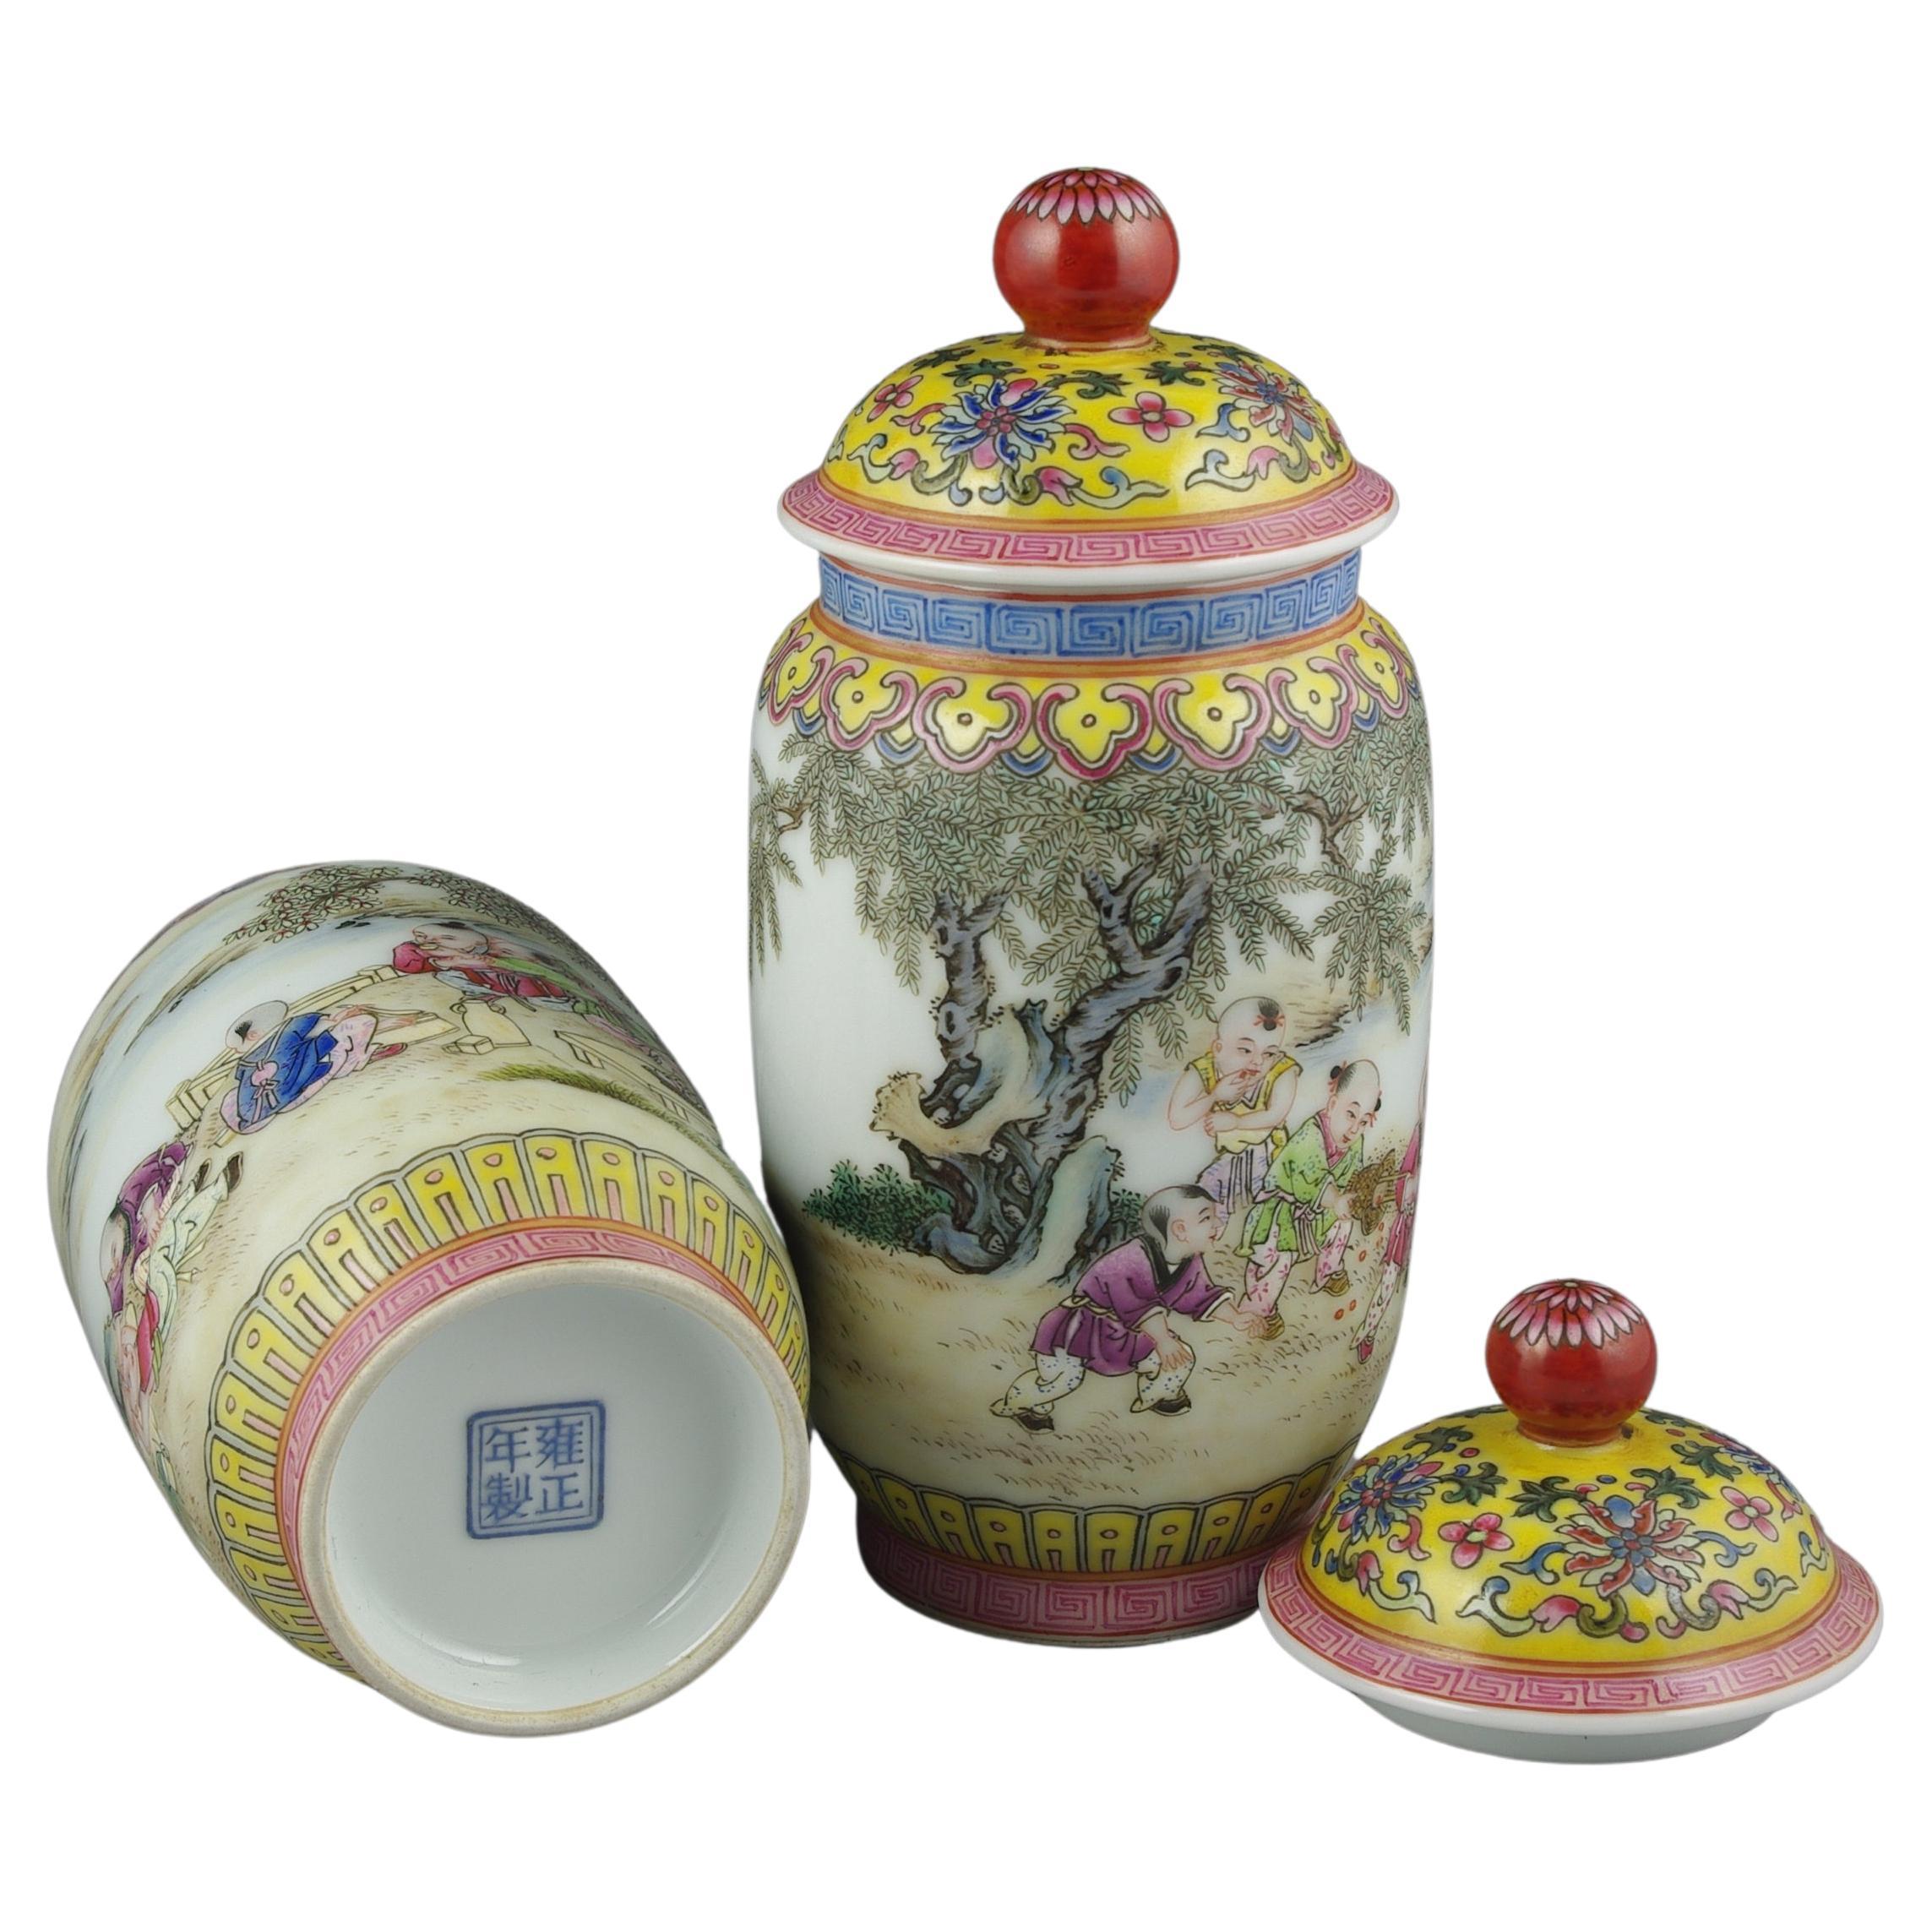 Finest Chinese Porcelain Fencai Covered Jars Children Playing Qing Style 20c  For Sale 1